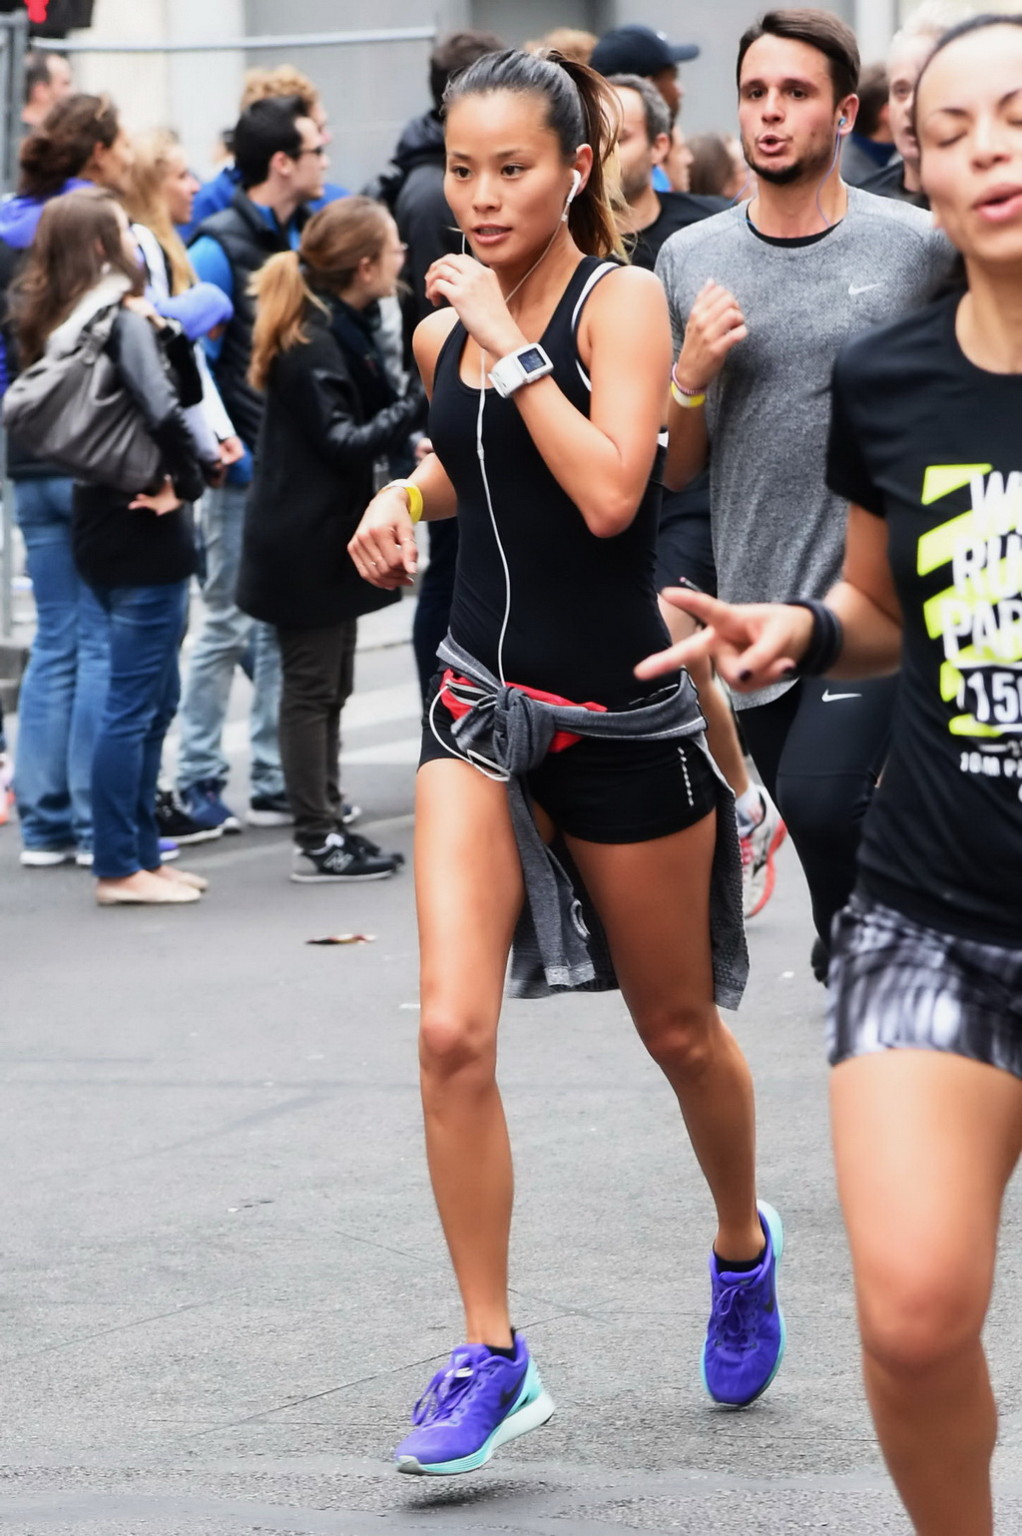 Jamie Chung wearing tiny black top and shorts while running in the Nike 10km Par #75184180